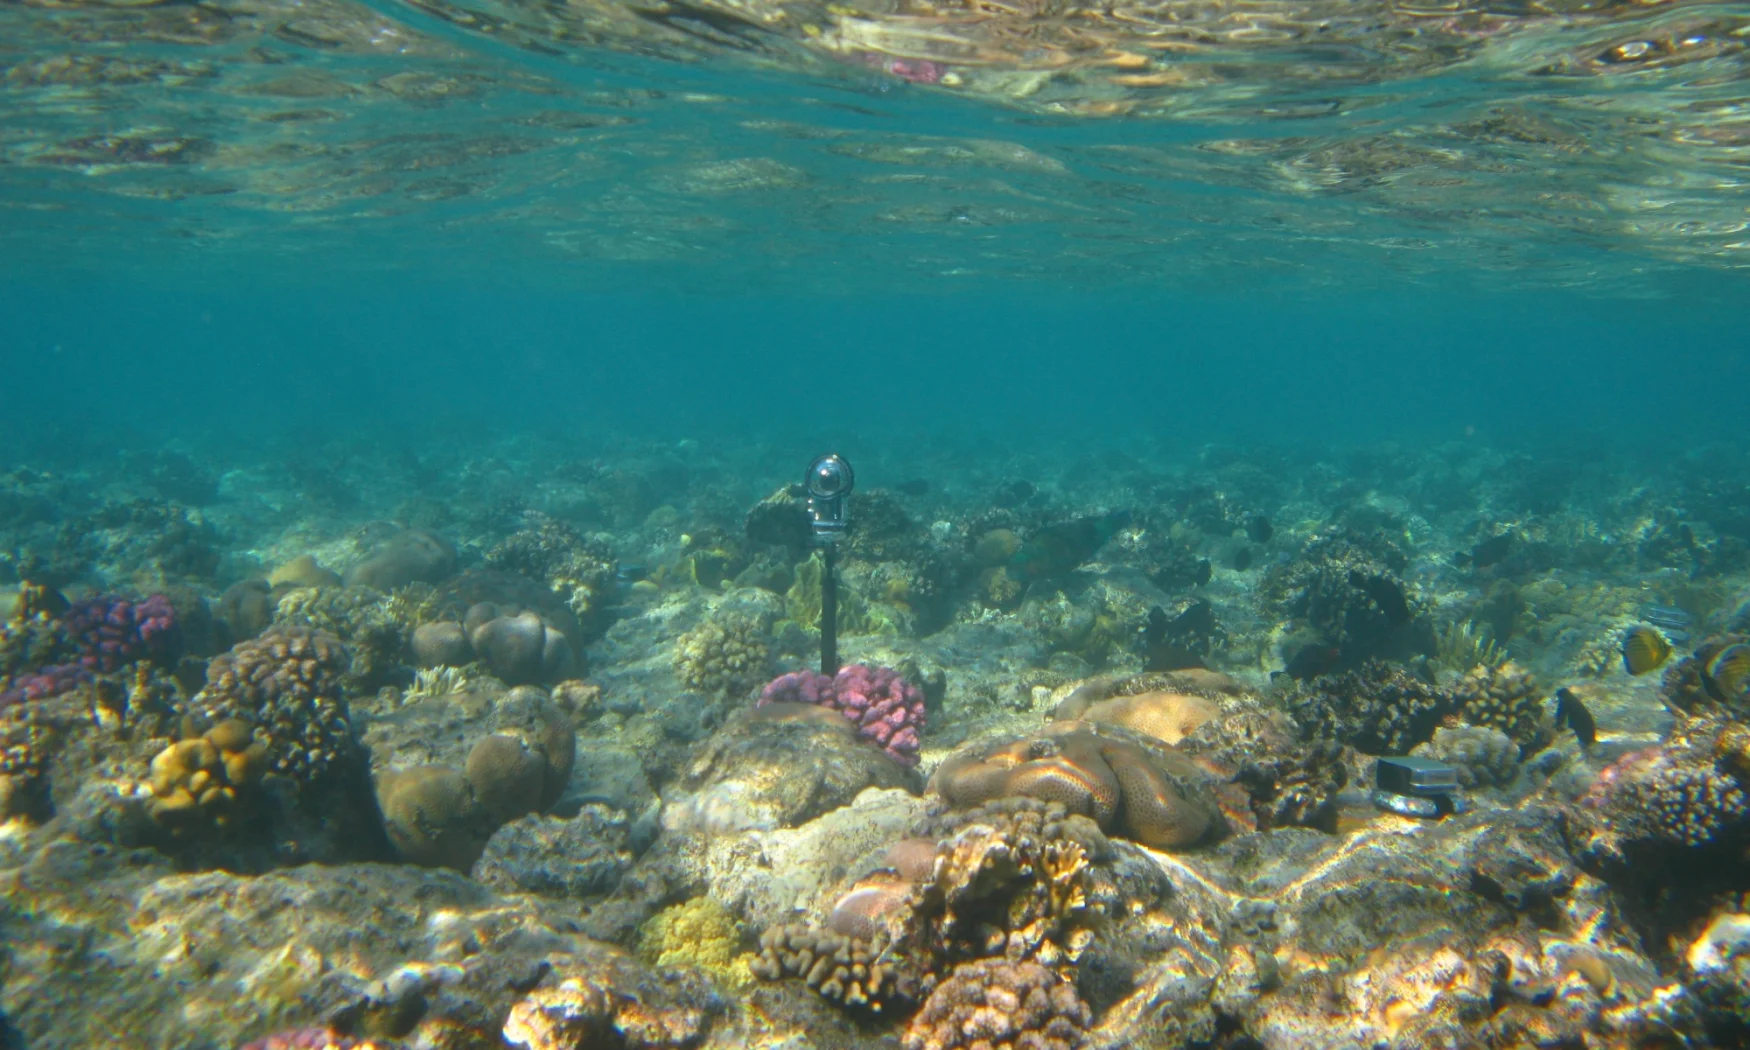 Underwater view of a coral reef with a hydrophone (underwater microphone) protruding upwards. Daylight.